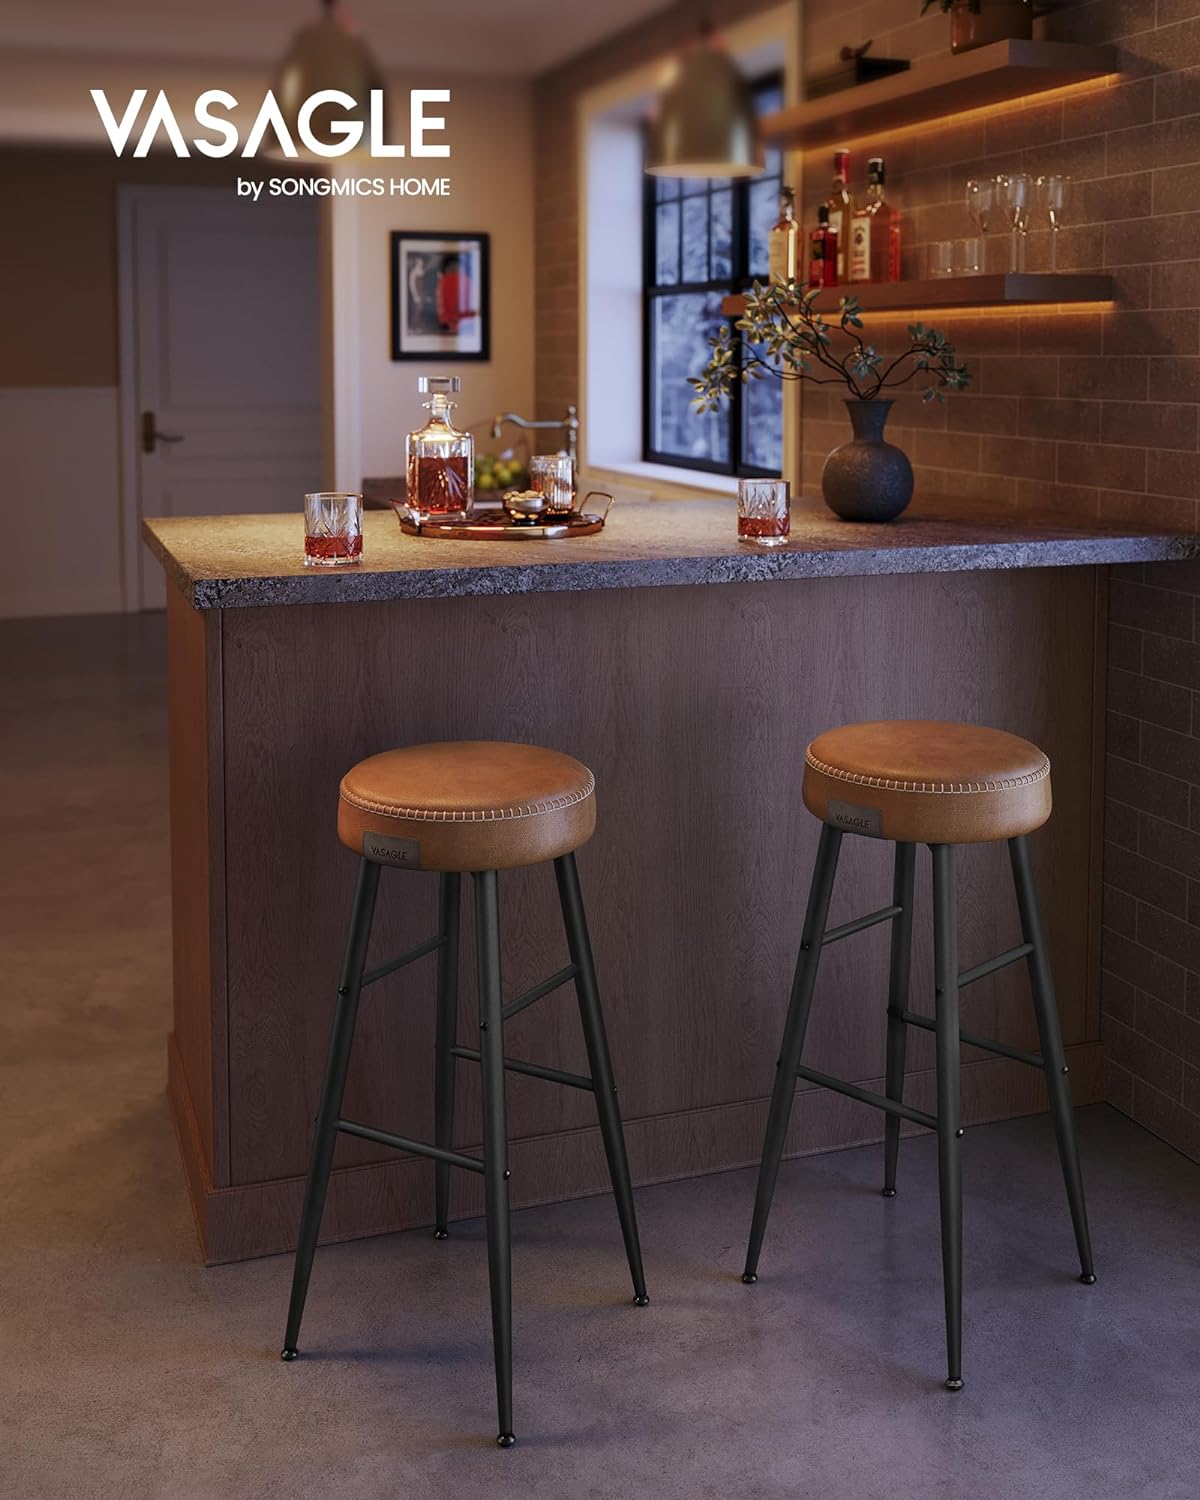 EKHO Collection - Bar Stools Set of 2, Kitchen Counter Stools, Breakfast Stools, Synthetic Leather with Stitching, 30-Inch Tall